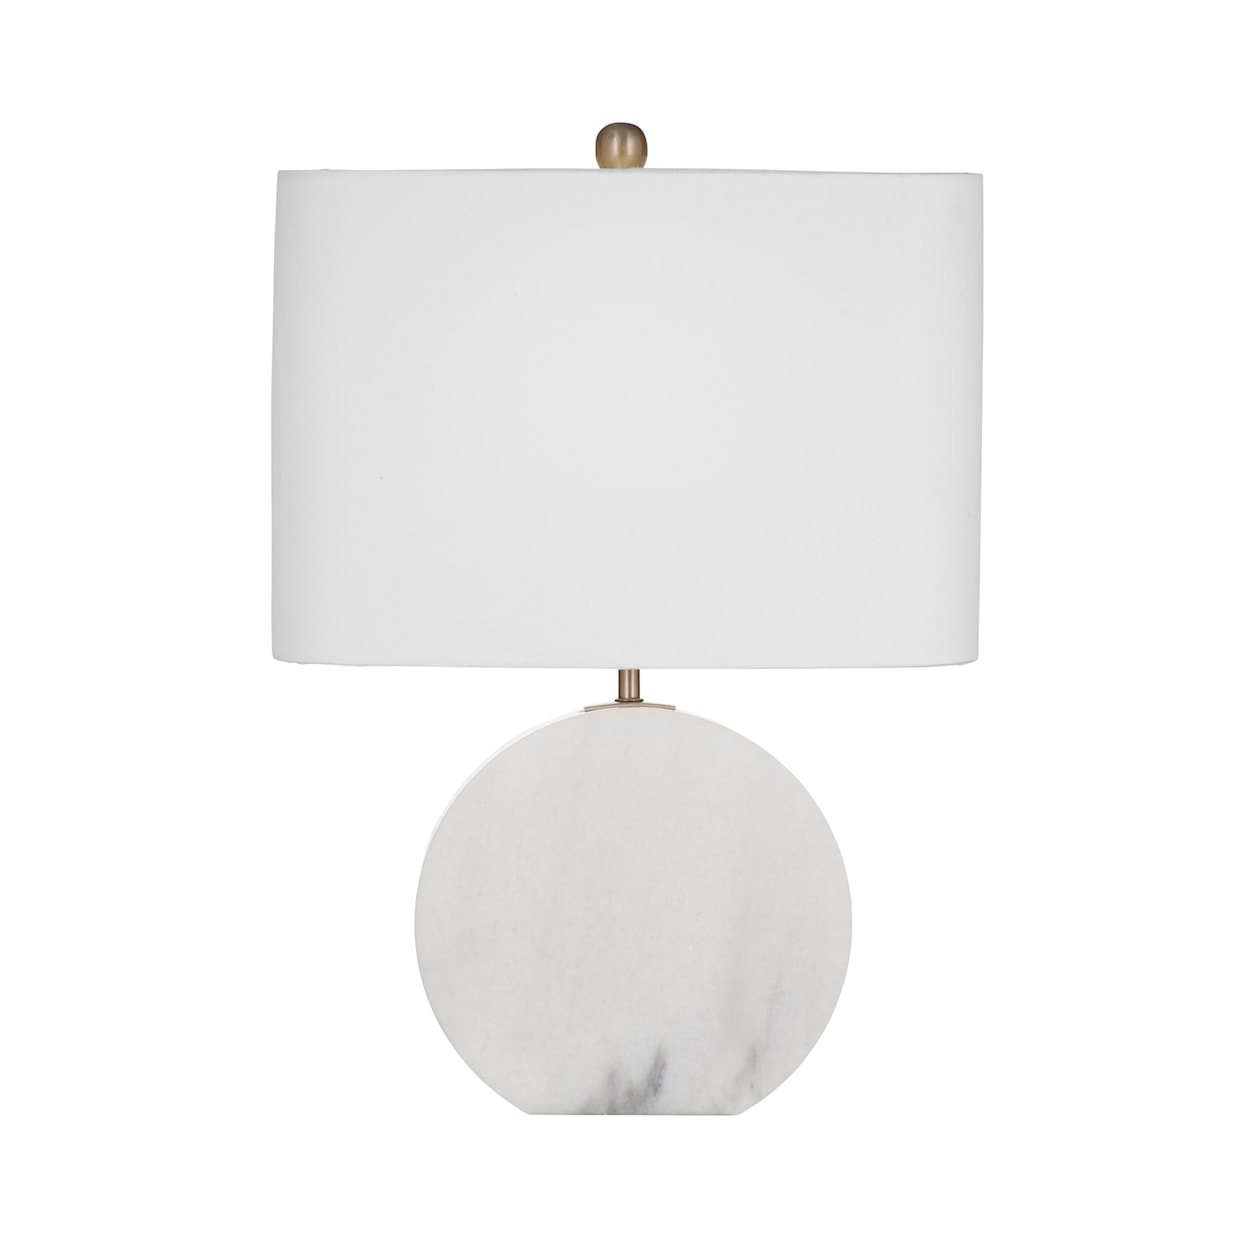 Bassett Mirror Table Lamps Coined Table Lamp